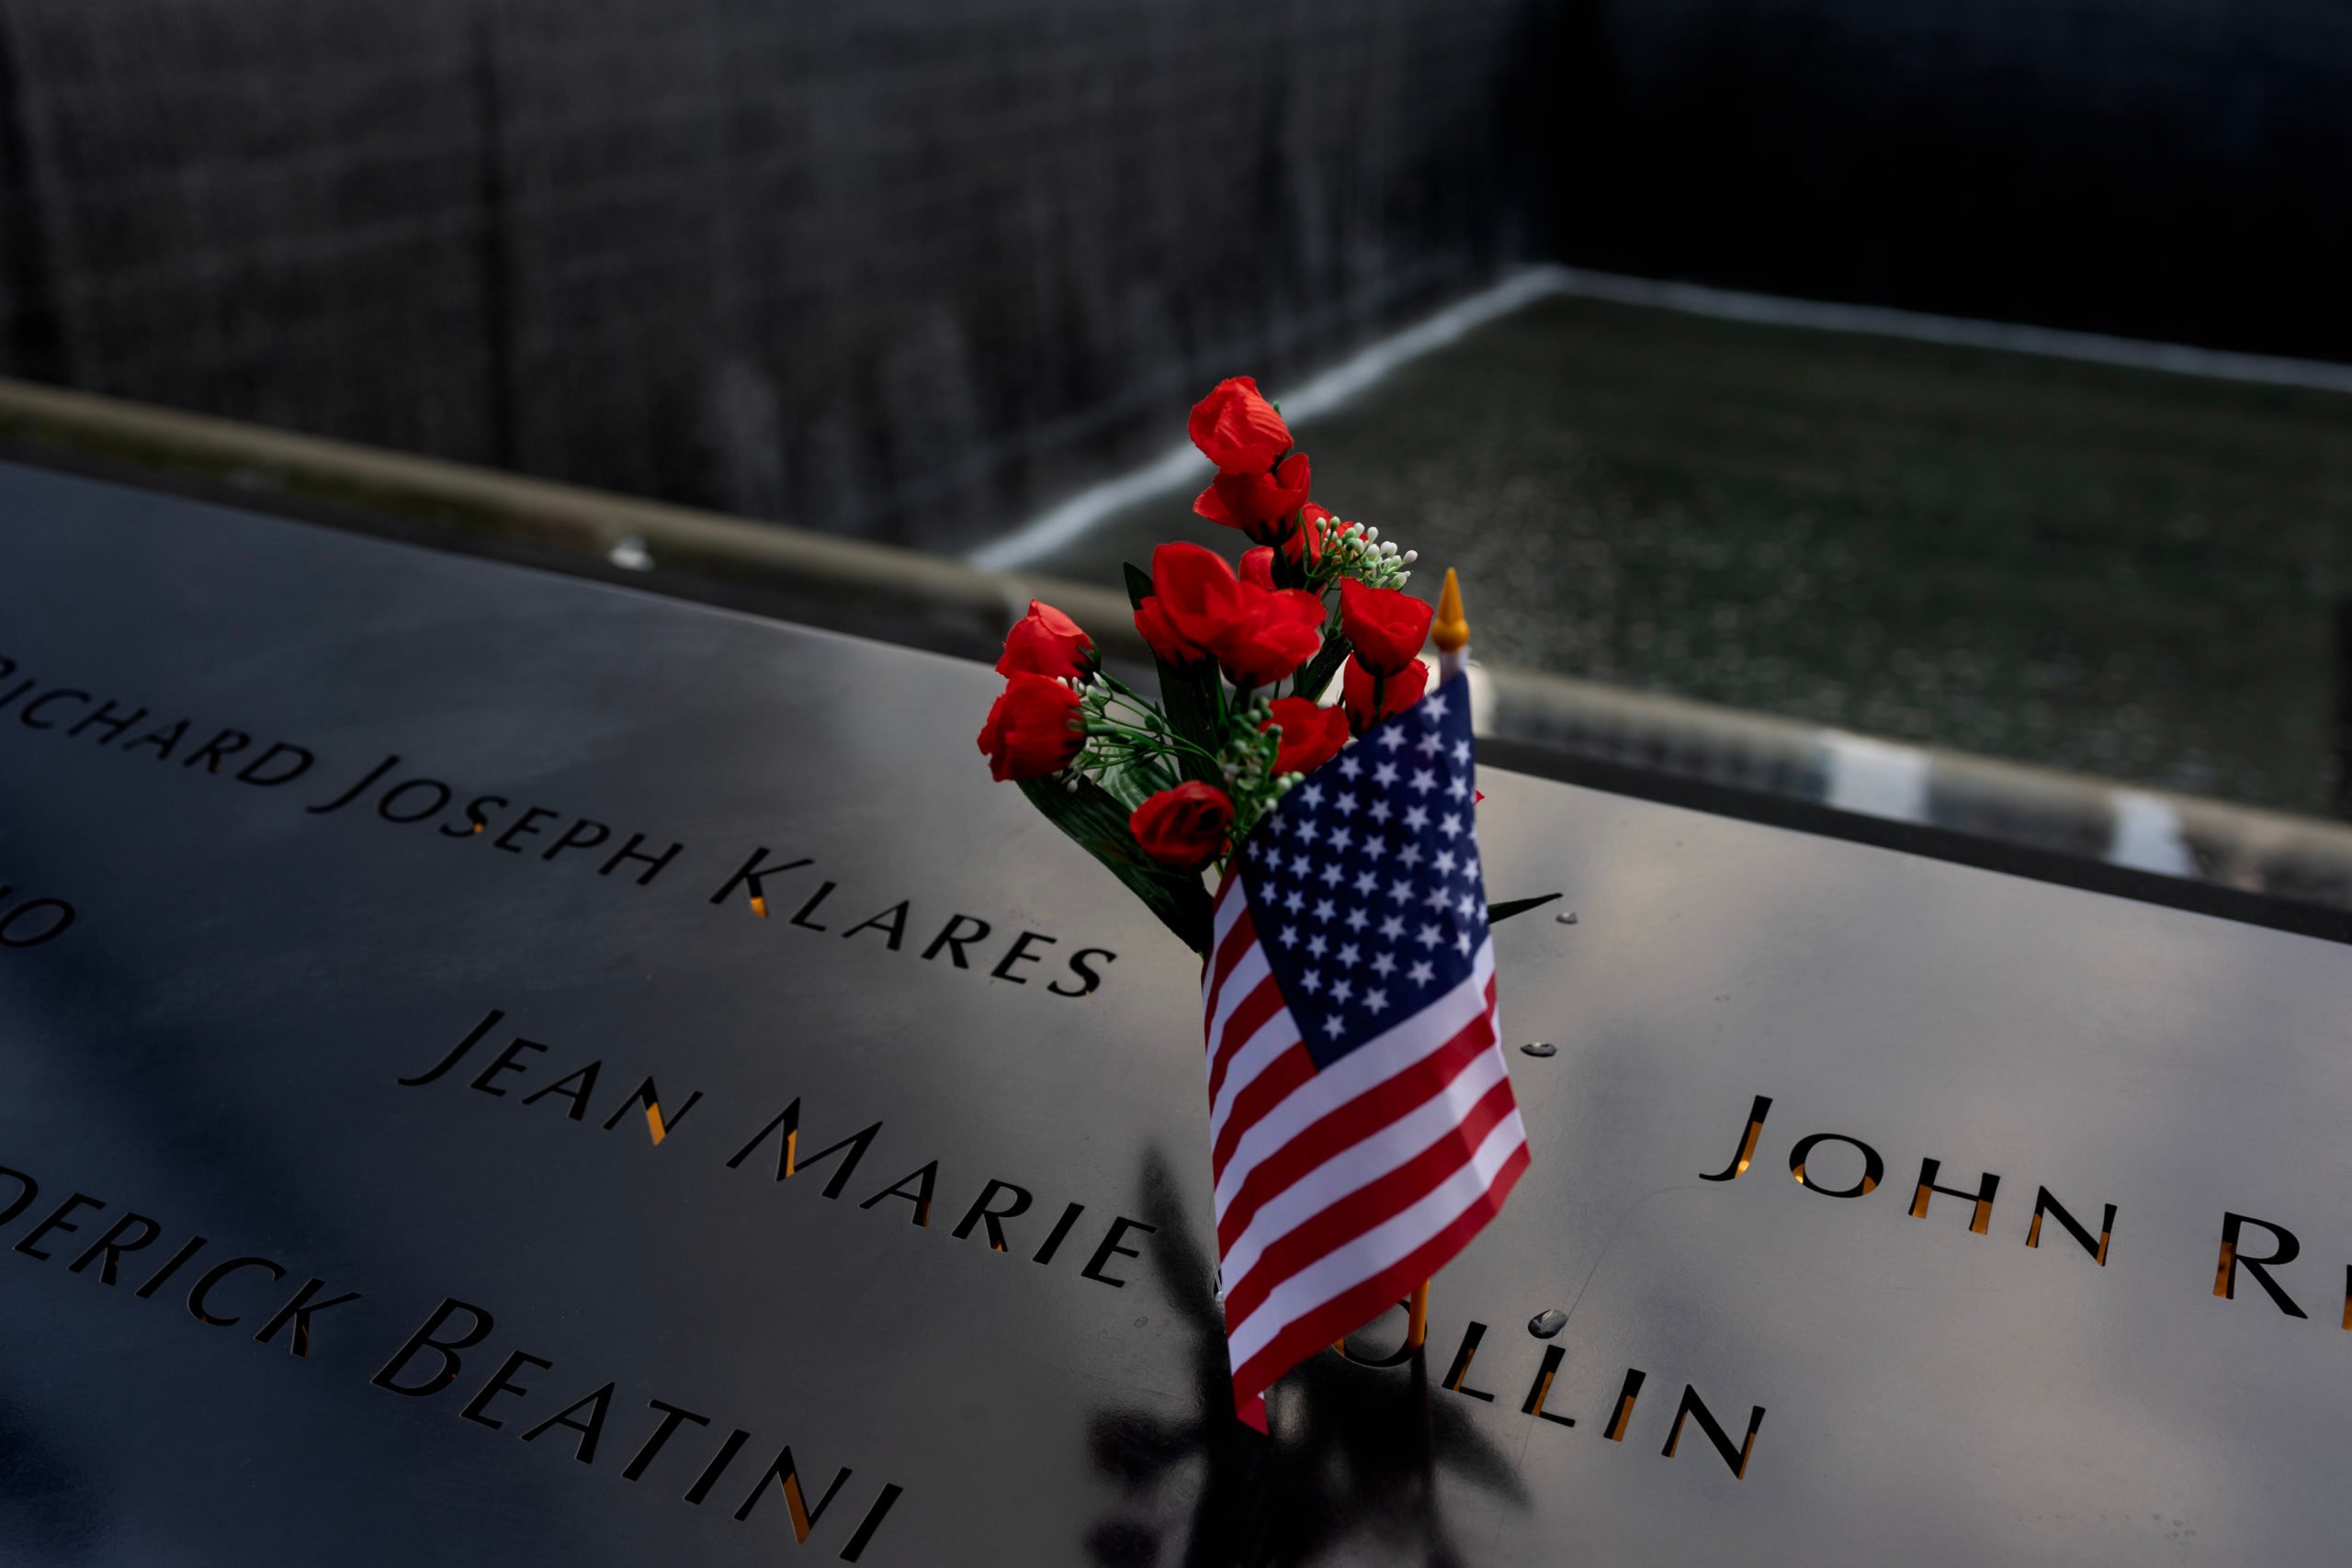 On the evening before the annual September 11 memorial services, people leave flowers and mementos in memory of the dead, September 10, 2023, at the Ground Zero World Trade Center memorial site. (Photo by Andrew Lichtenstein/Corbis via Getty Images)